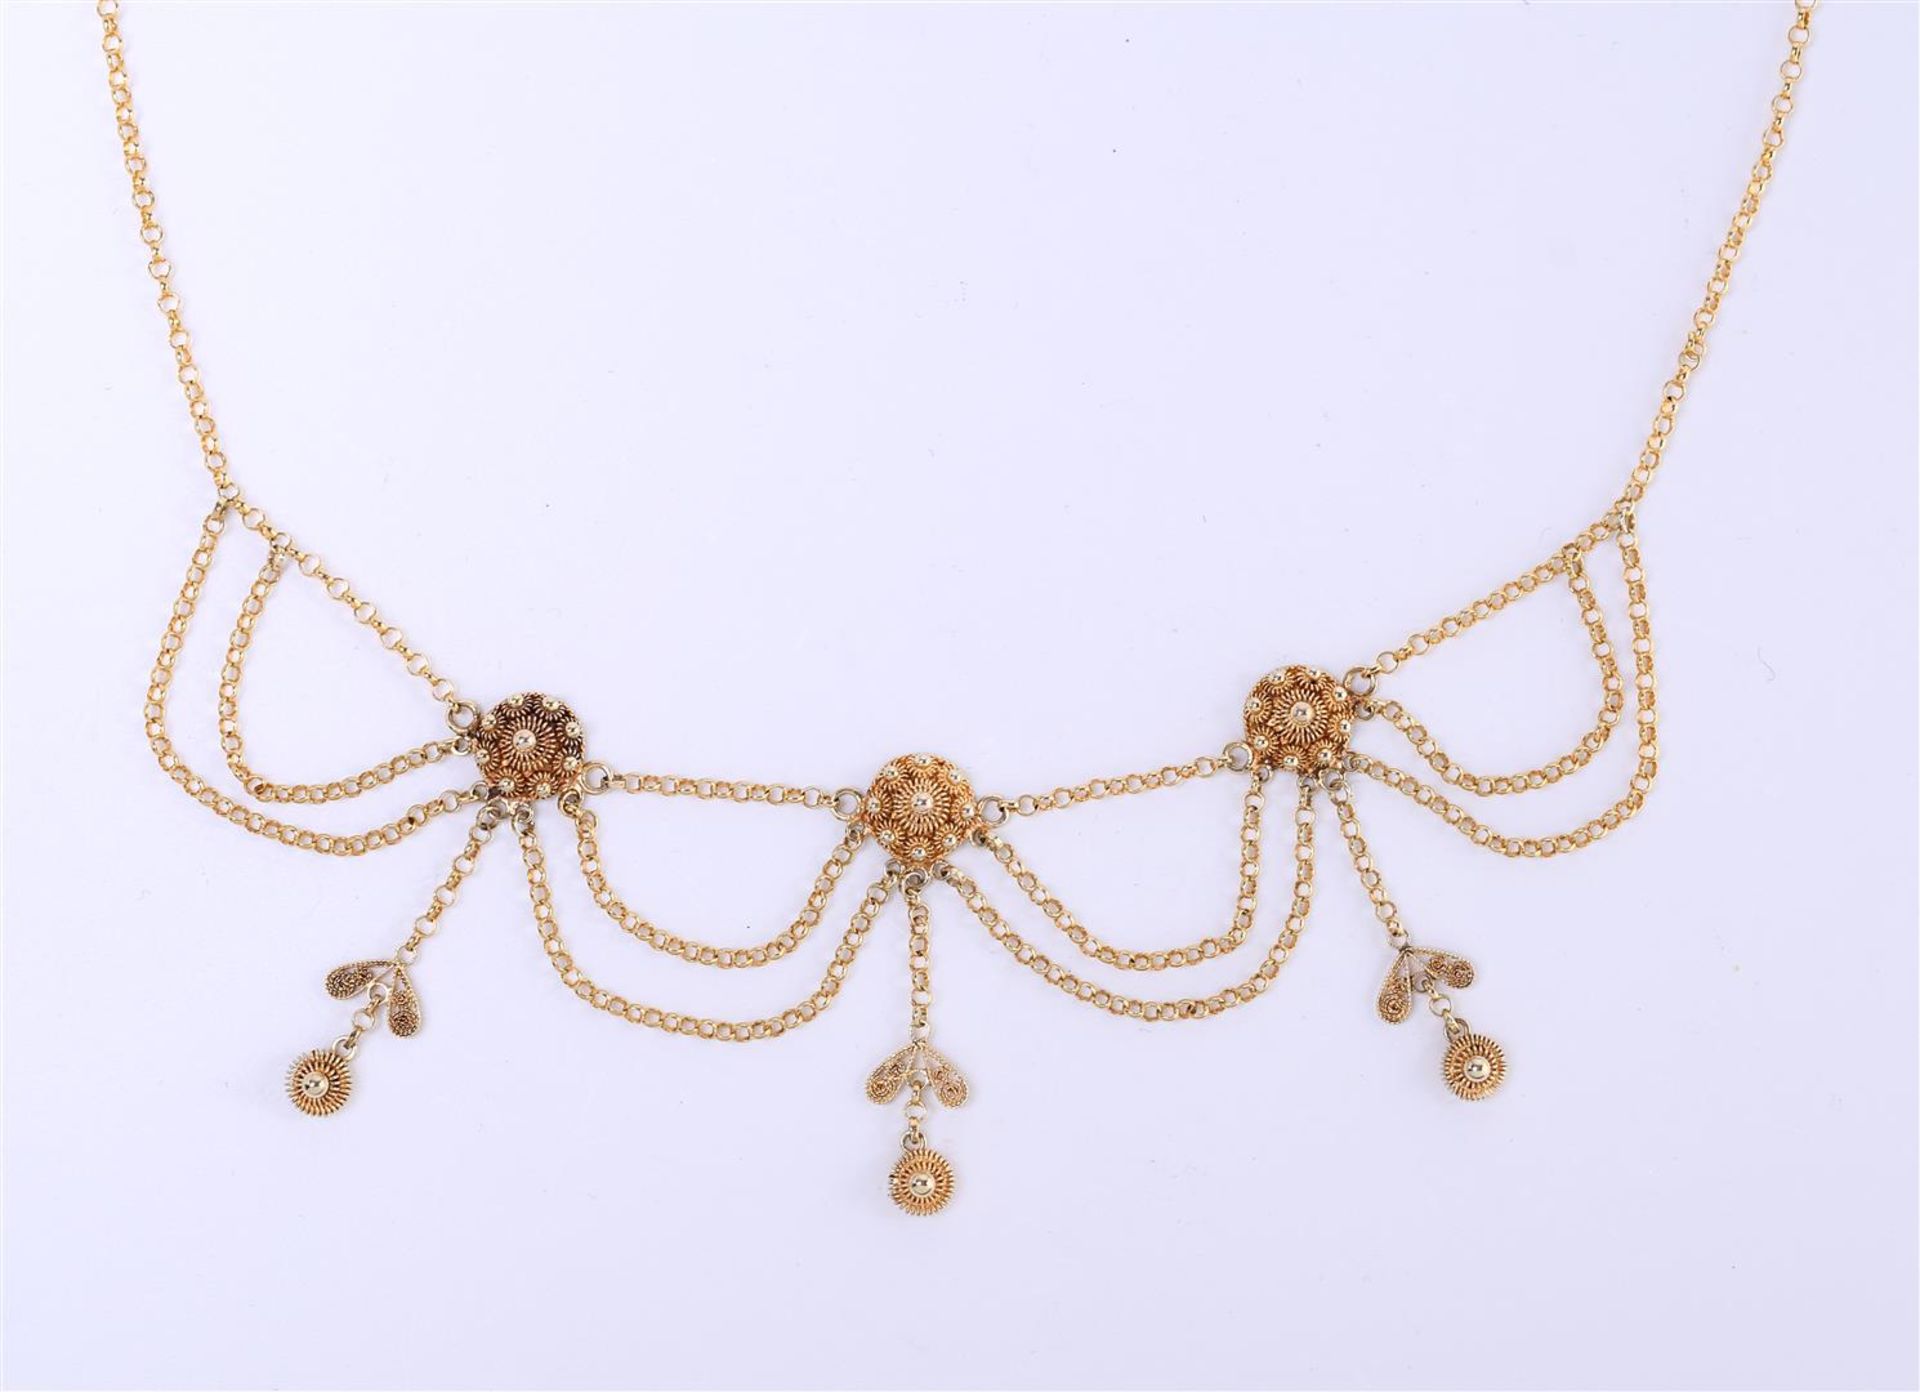 18 kt beautiful yellow gold Zeeland button necklace in Victorian style, ca. 1880-1920